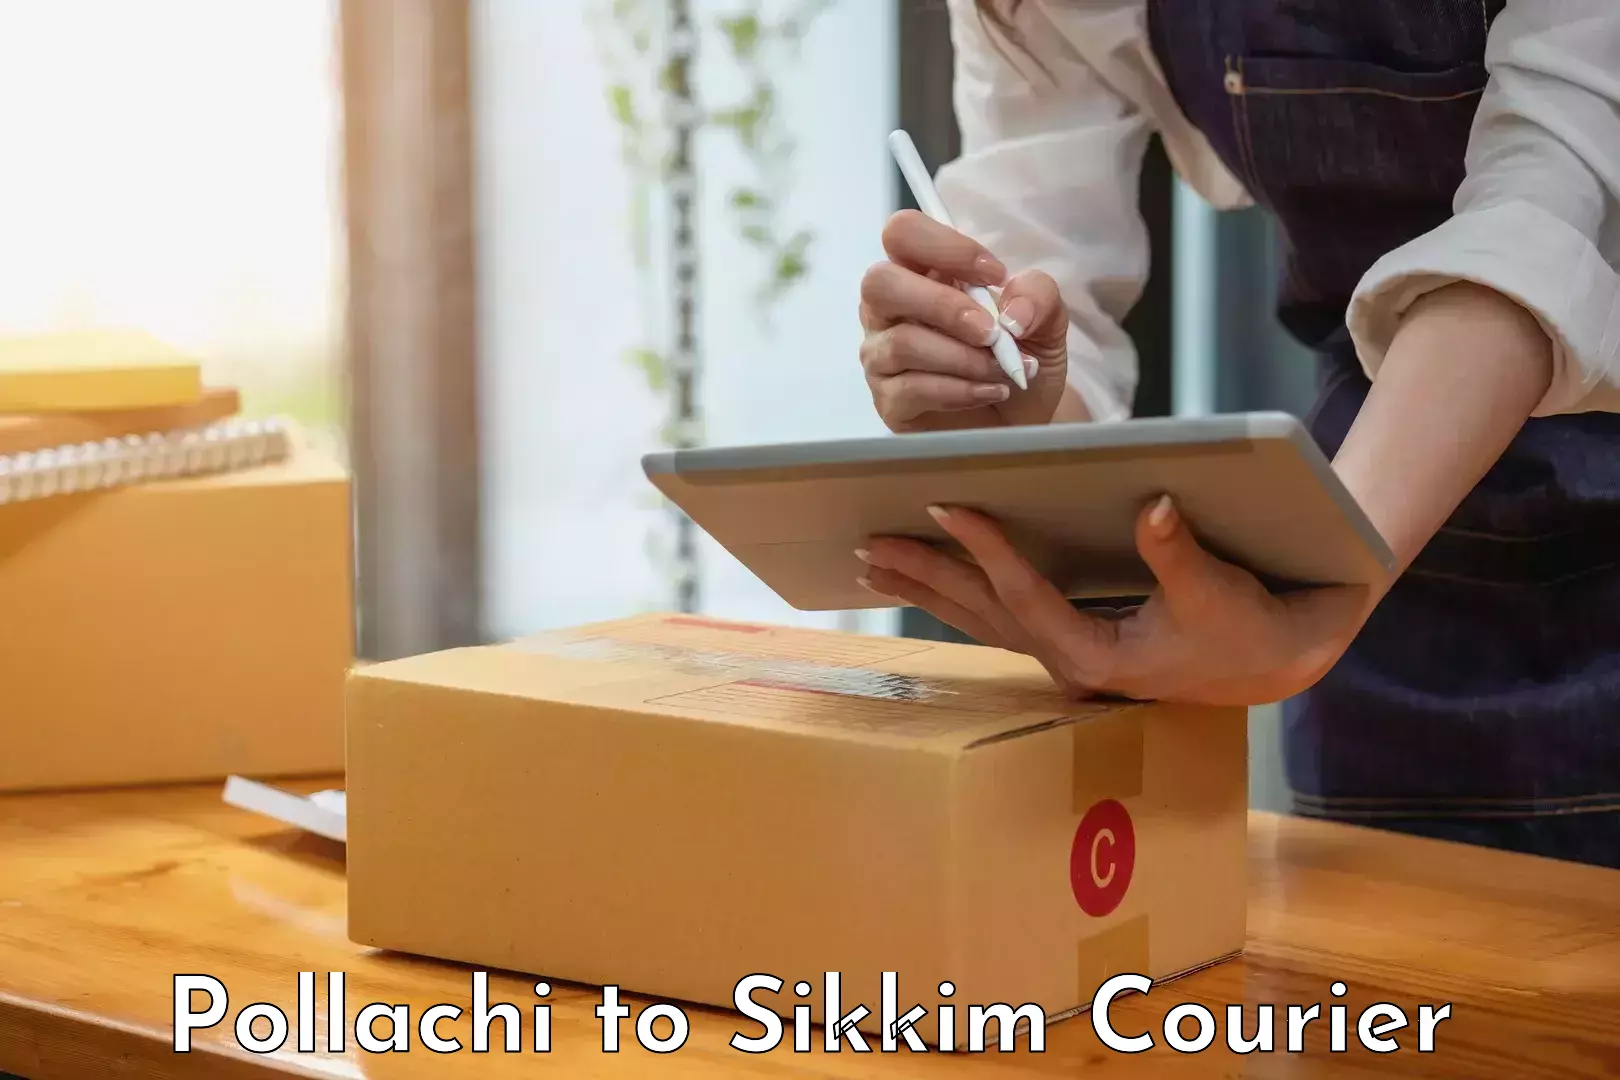 User-friendly courier app Pollachi to Sikkim